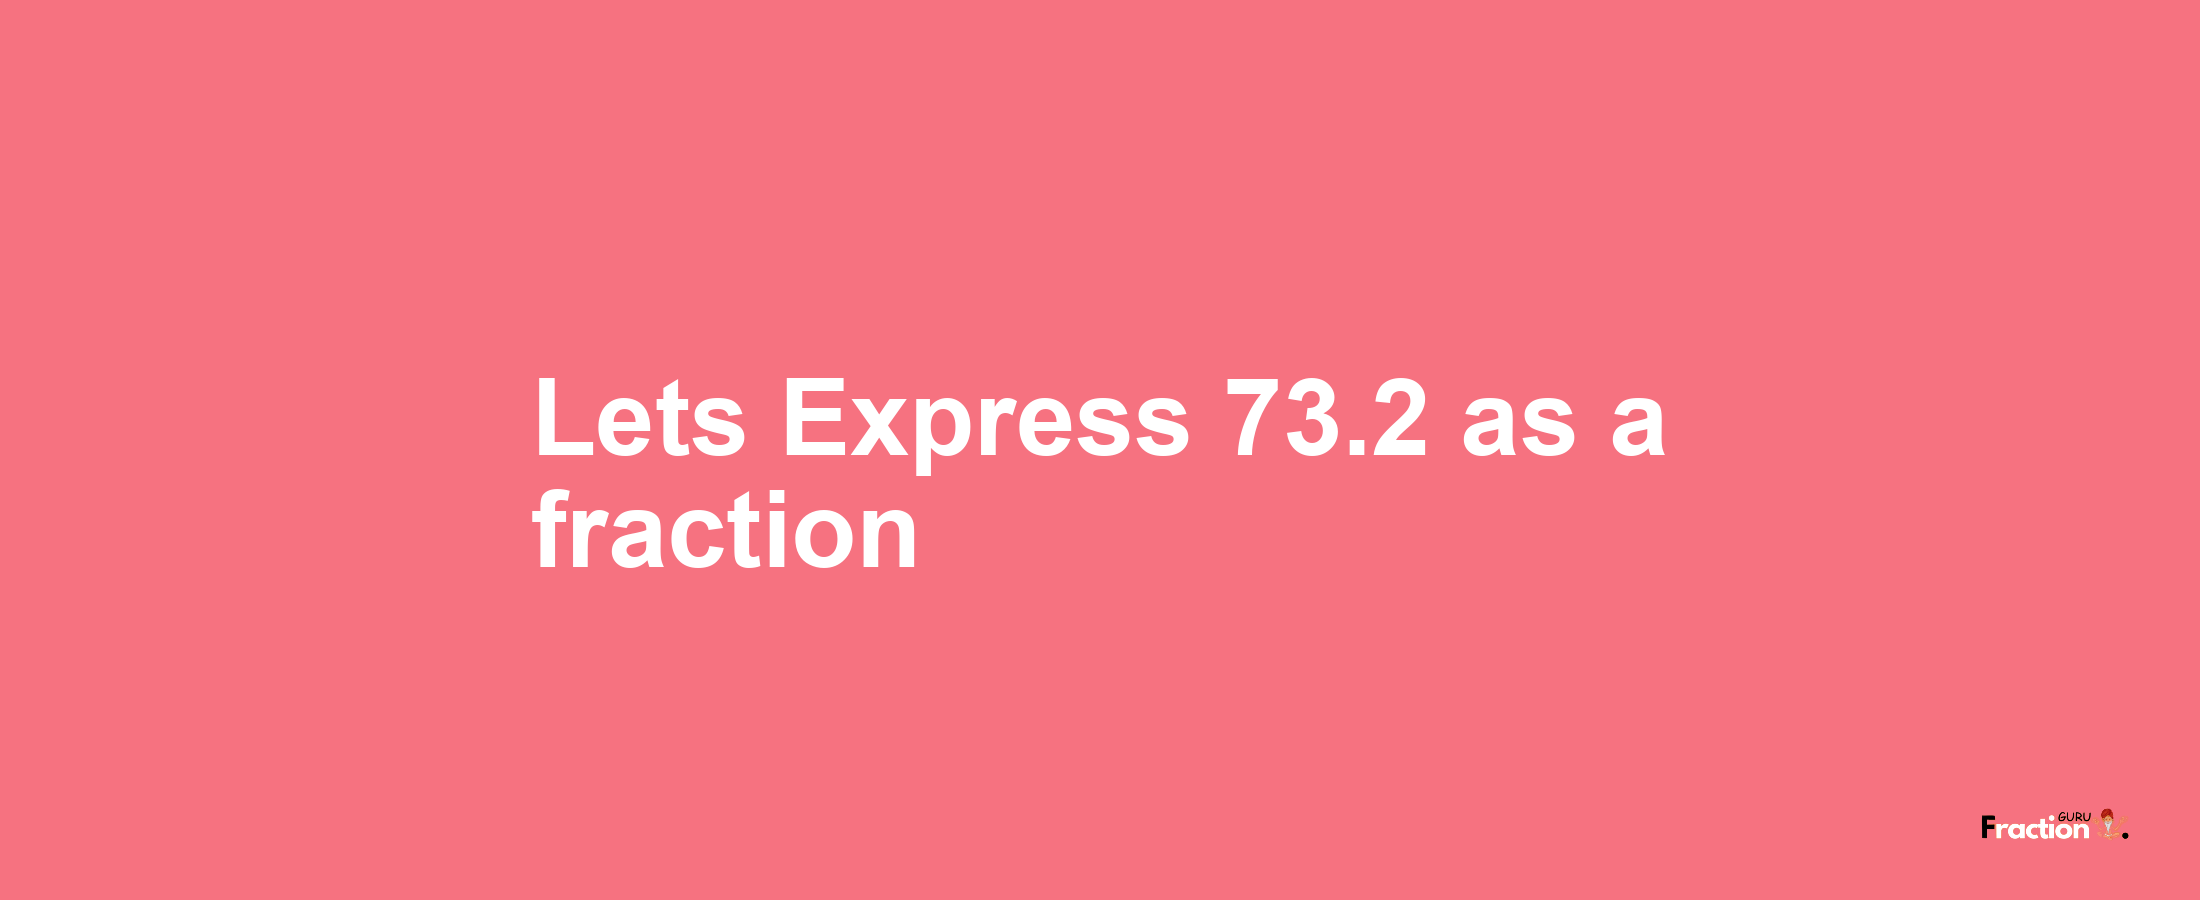 Lets Express 73.2 as afraction